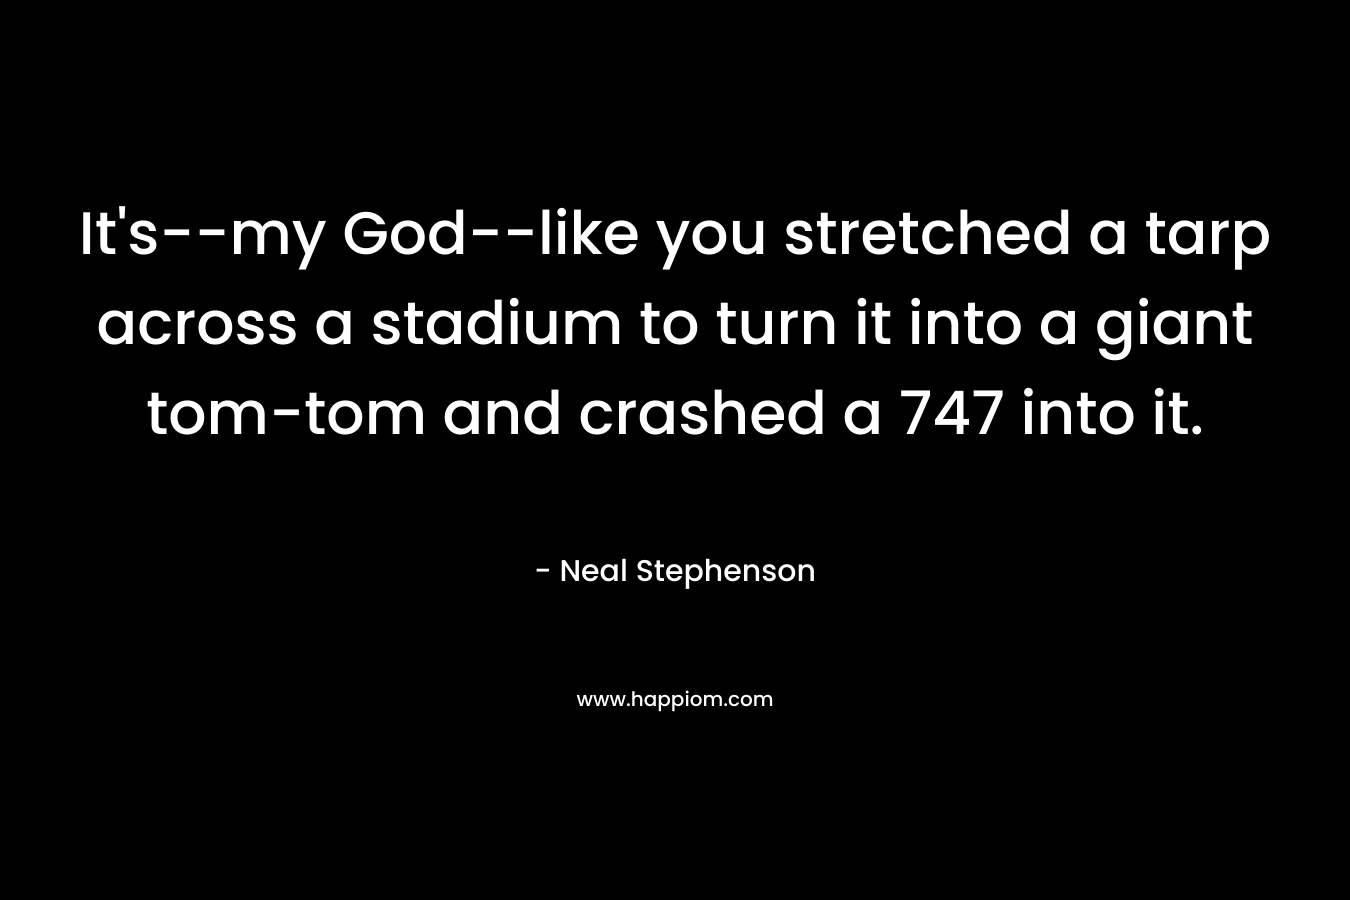 It’s–my God–like you stretched a tarp across a stadium to turn it into a giant tom-tom and crashed a 747 into it. – Neal Stephenson